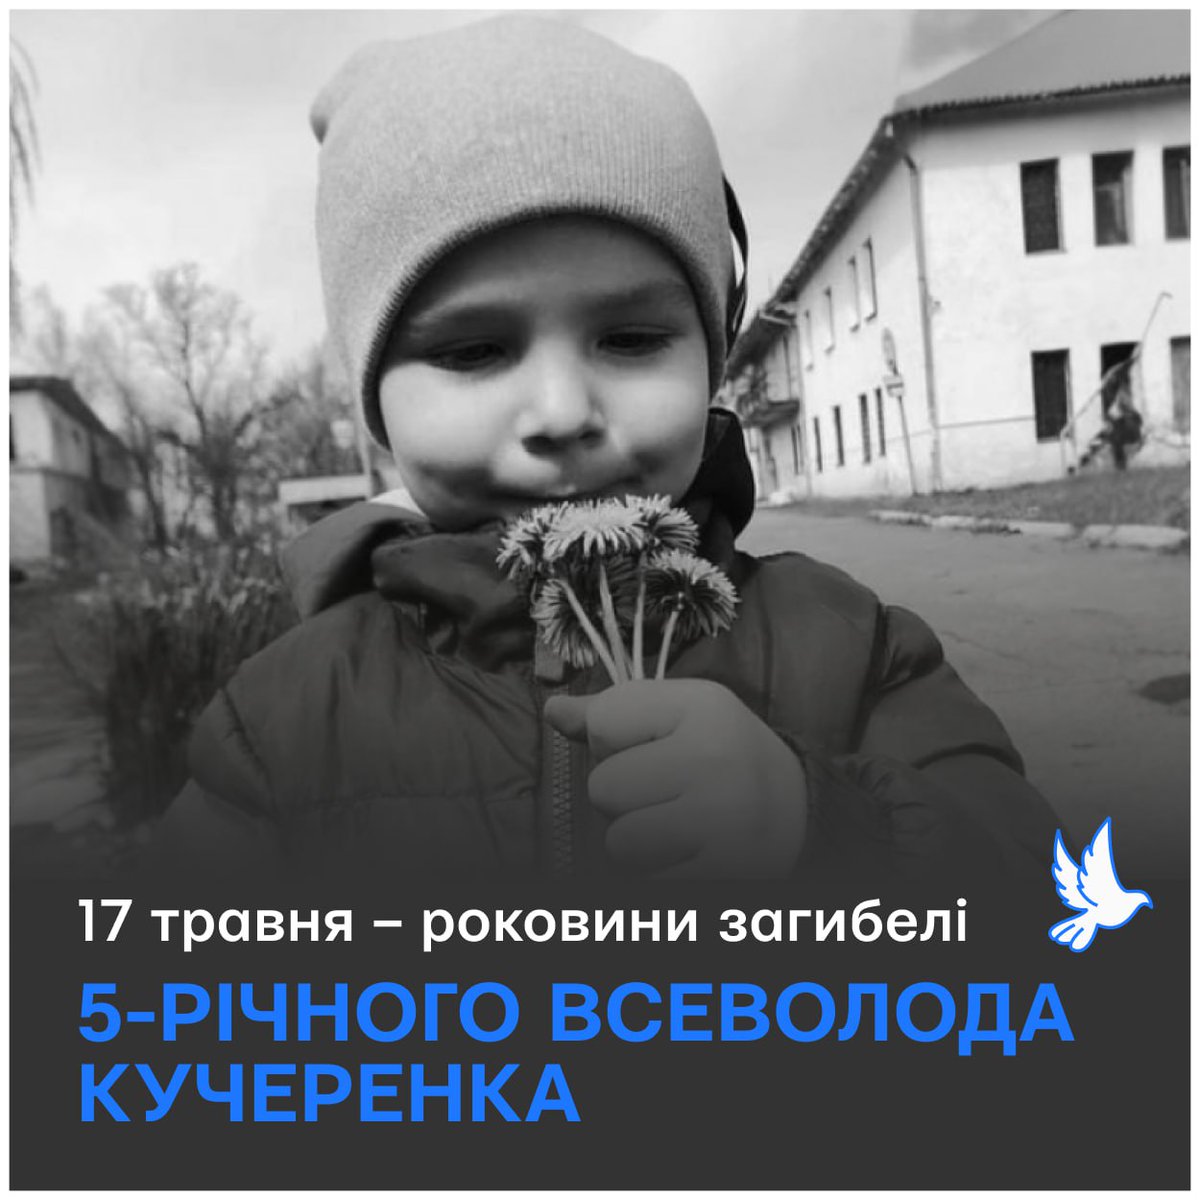 🕯 May 17 was the anniversary of the death of 5-year-old Vsevolod Kucherenko. In the family, the boy was gently called Seva. He lived with his parents in the village of Zelenivka in the Kherson region. He went to kindergarten there. 'He grew up a very intelligent boy. He was